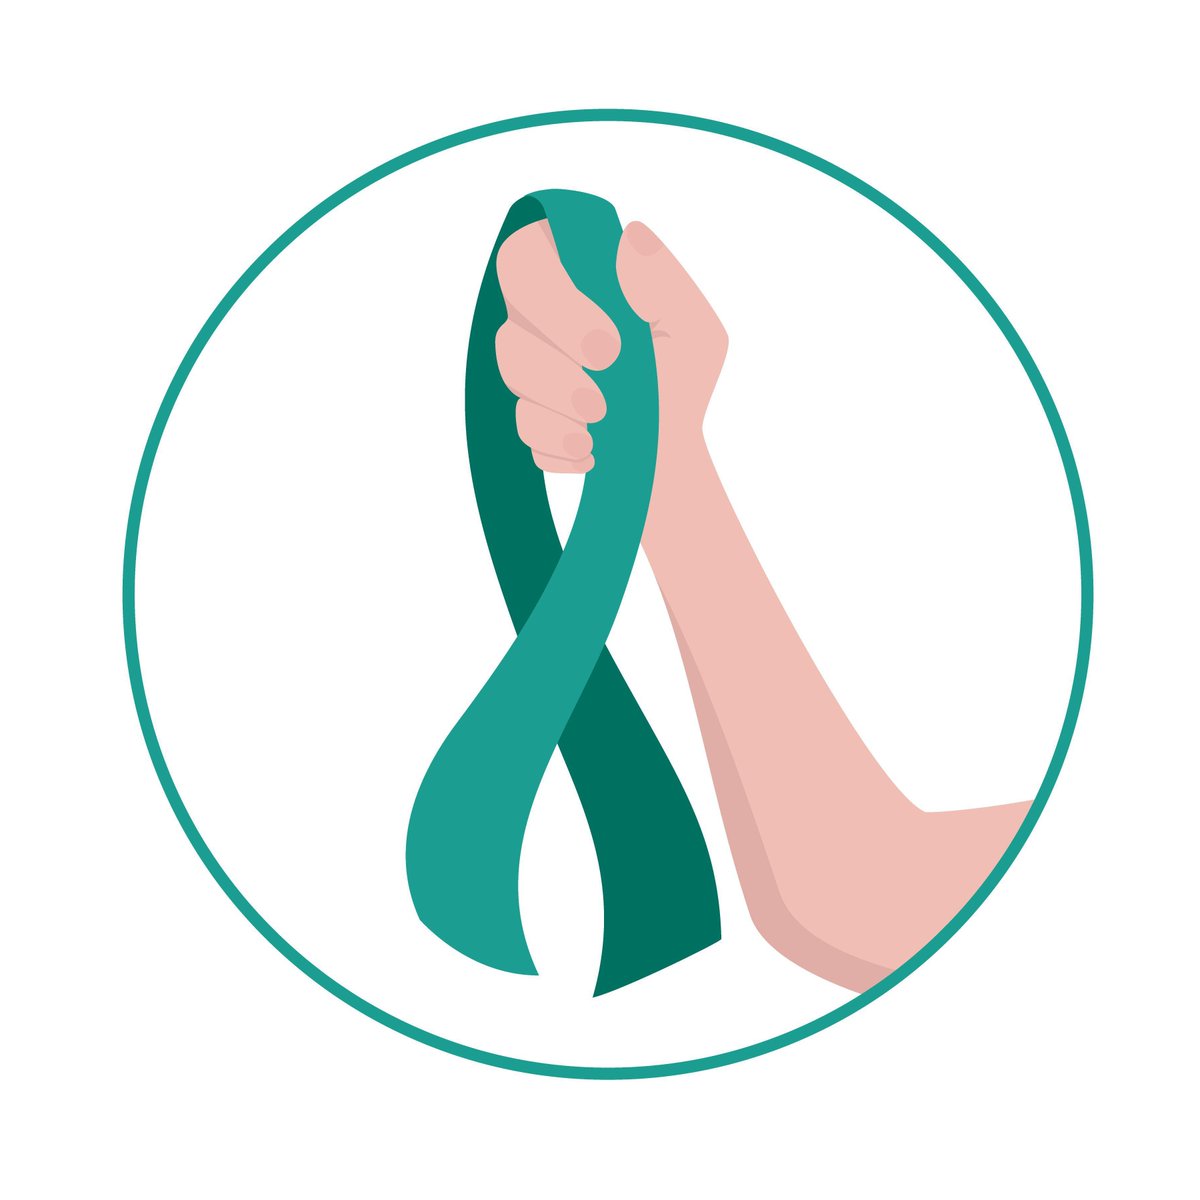 For #WorldOvarianCancerAwarenessDay, we have compiled a guide on key things you should know about ovarian cancer. Currently there are 41,000 people living with ovarian cancer in the UK and 40% of women wrongly think that a cervical screening detects ovarian cancer. Find out…